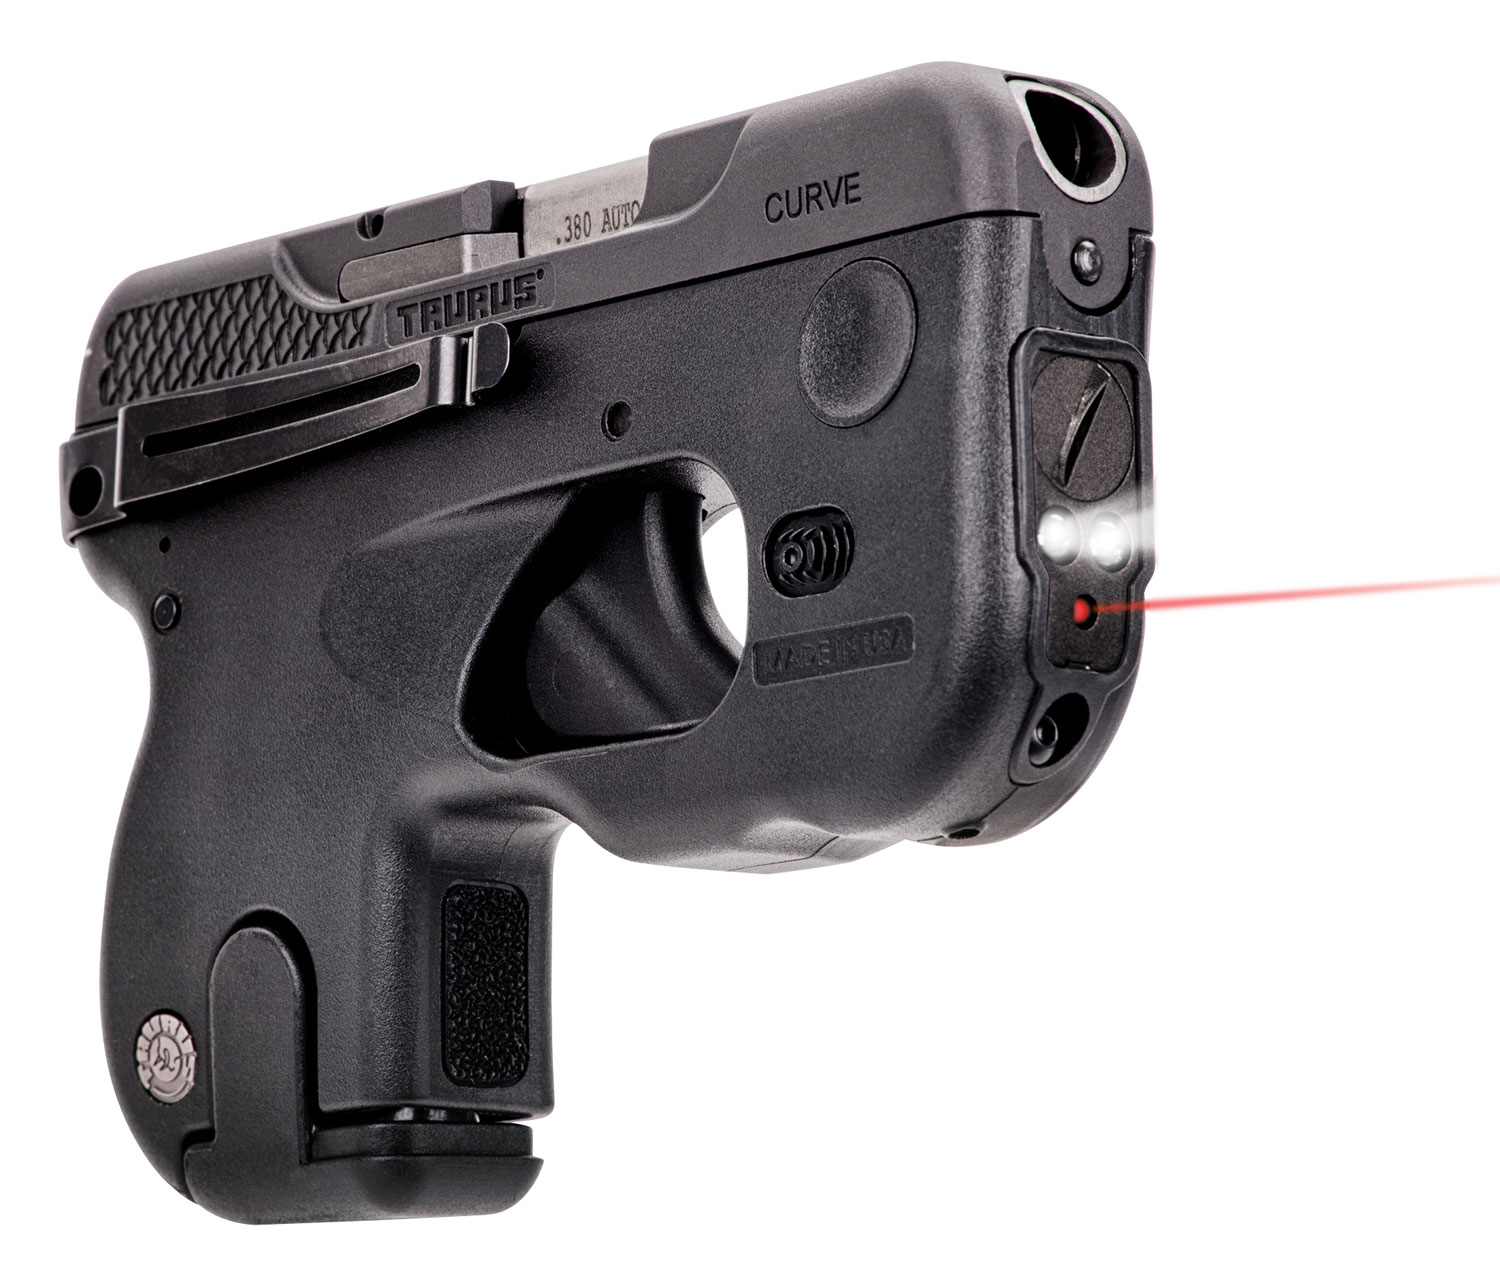 Viridian 931-0002 Taurus Curve Laser/Tactical Light Combo Red Laser with 25 yds Day/1 mi Night Range & Light Black Finish for Taurus Curve